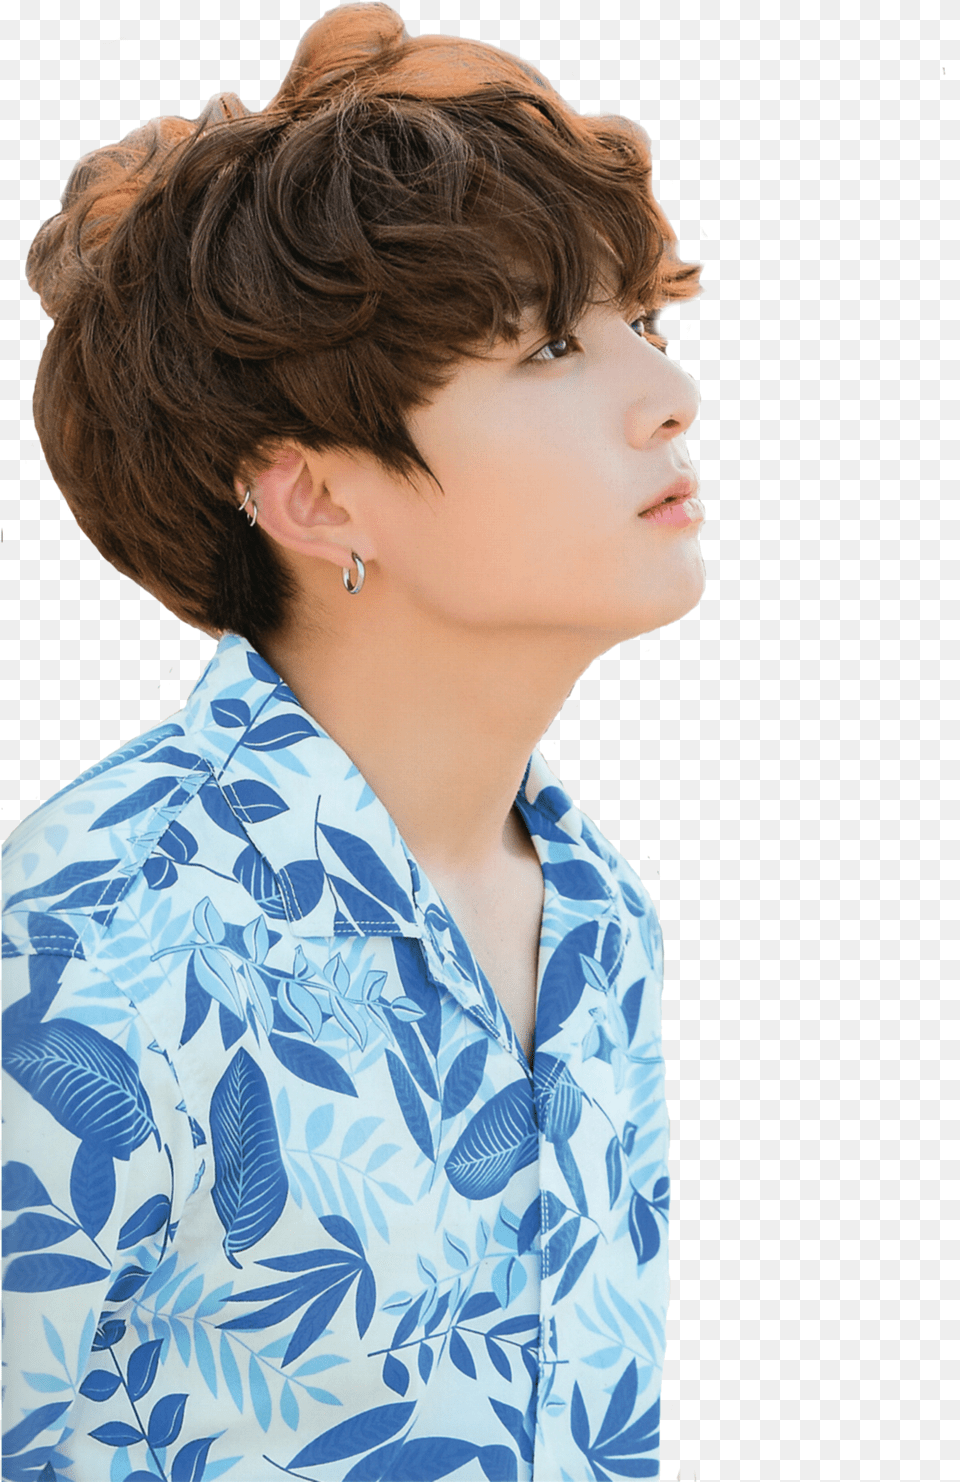 Bangtan Bts Jungkook Curly Hair, Accessories, Portrait, Photography, Person Png Image